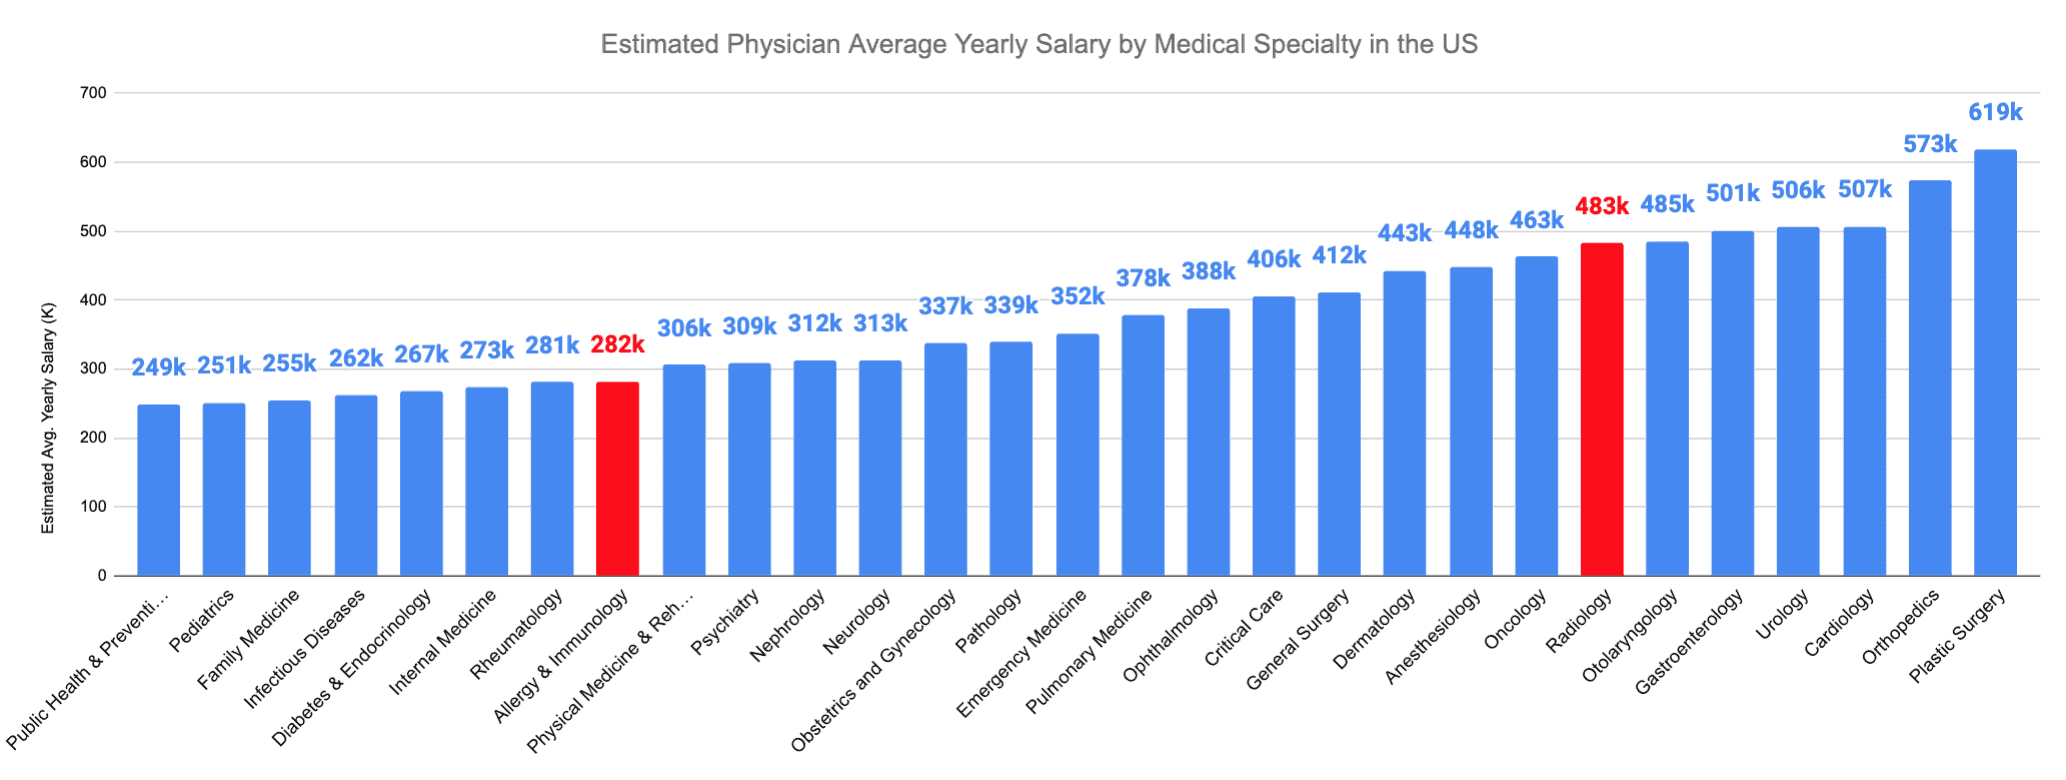 Radiology vs. Allergy and Immunology Estimated Physician Average Yearly Salary by Medical Specialty in the US